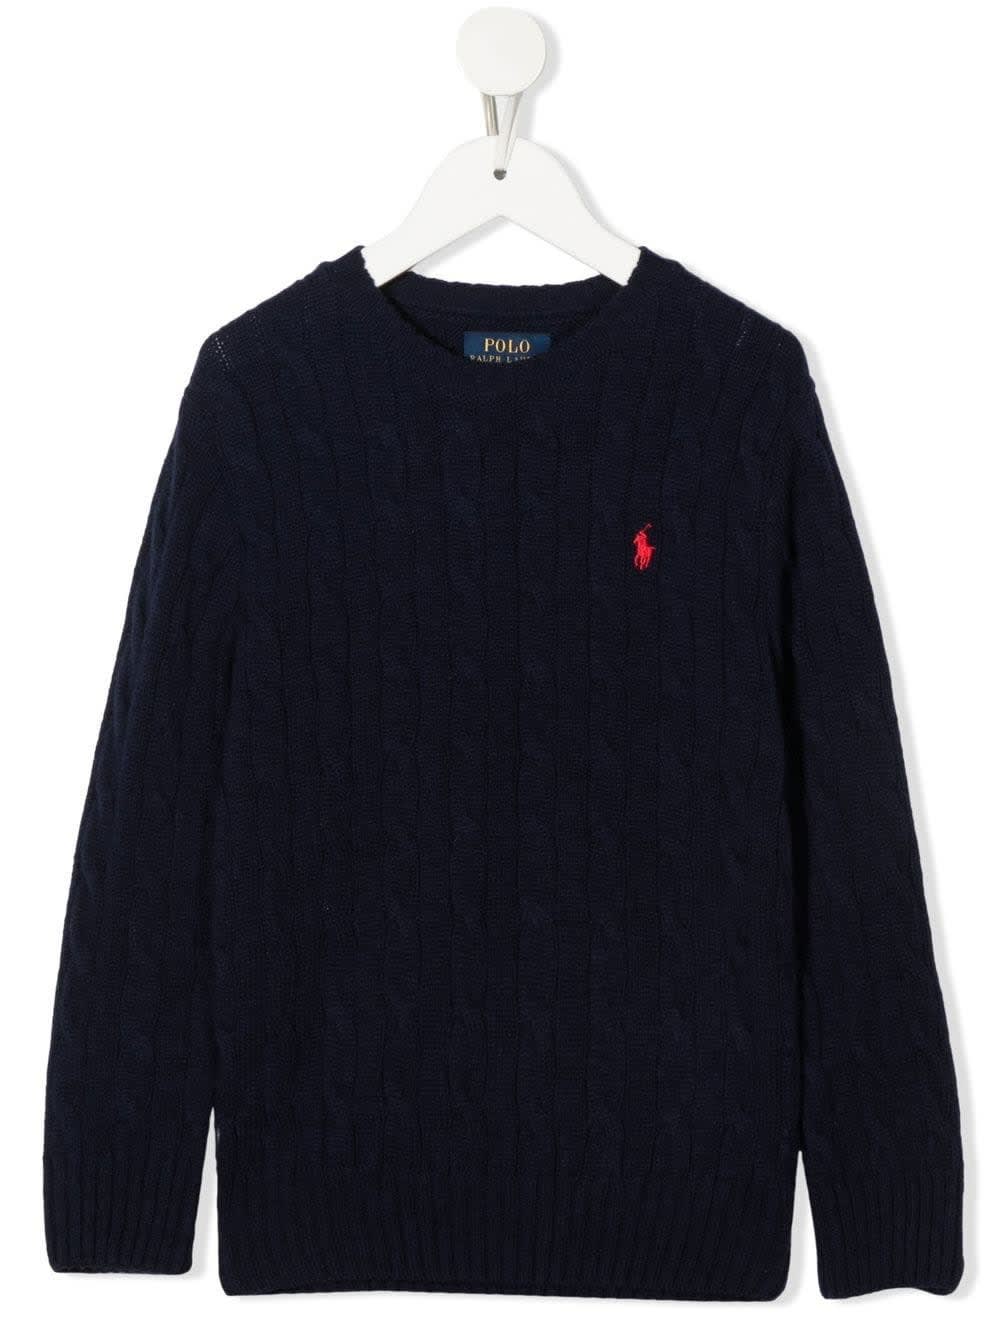 Ralph Lauren Kids Navy Blue Cable Knit Sweater With Red Pony